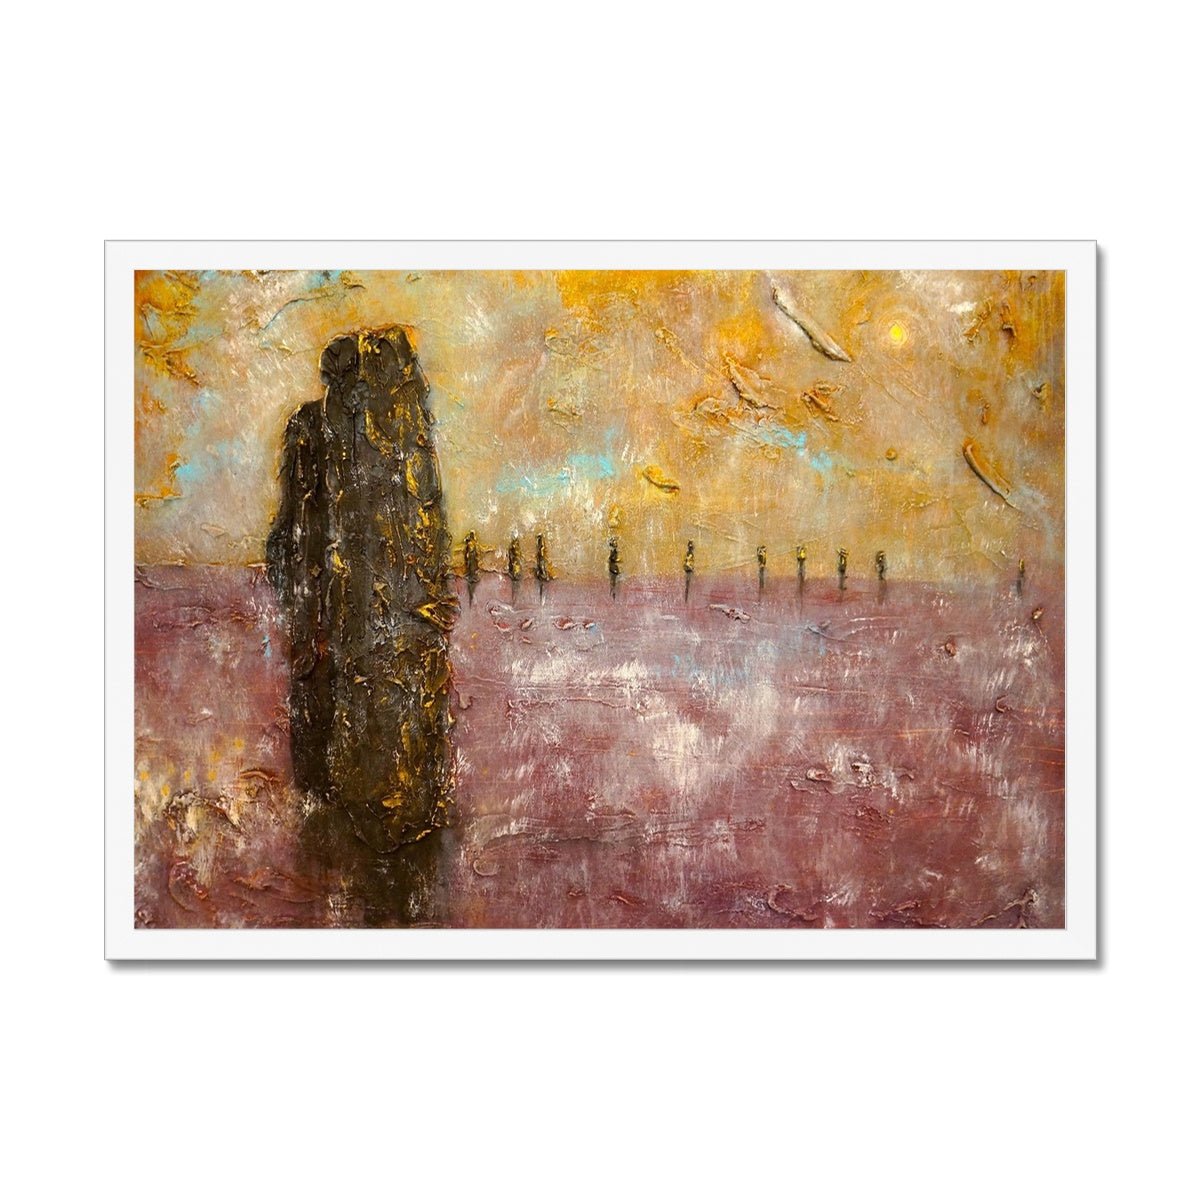 Brodgar Mist Orkney Painting | Framed Prints From Scotland-Framed Prints-Orkney Art Gallery-A2 Landscape-White Frame-Paintings, Prints, Homeware, Art Gifts From Scotland By Scottish Artist Kevin Hunter